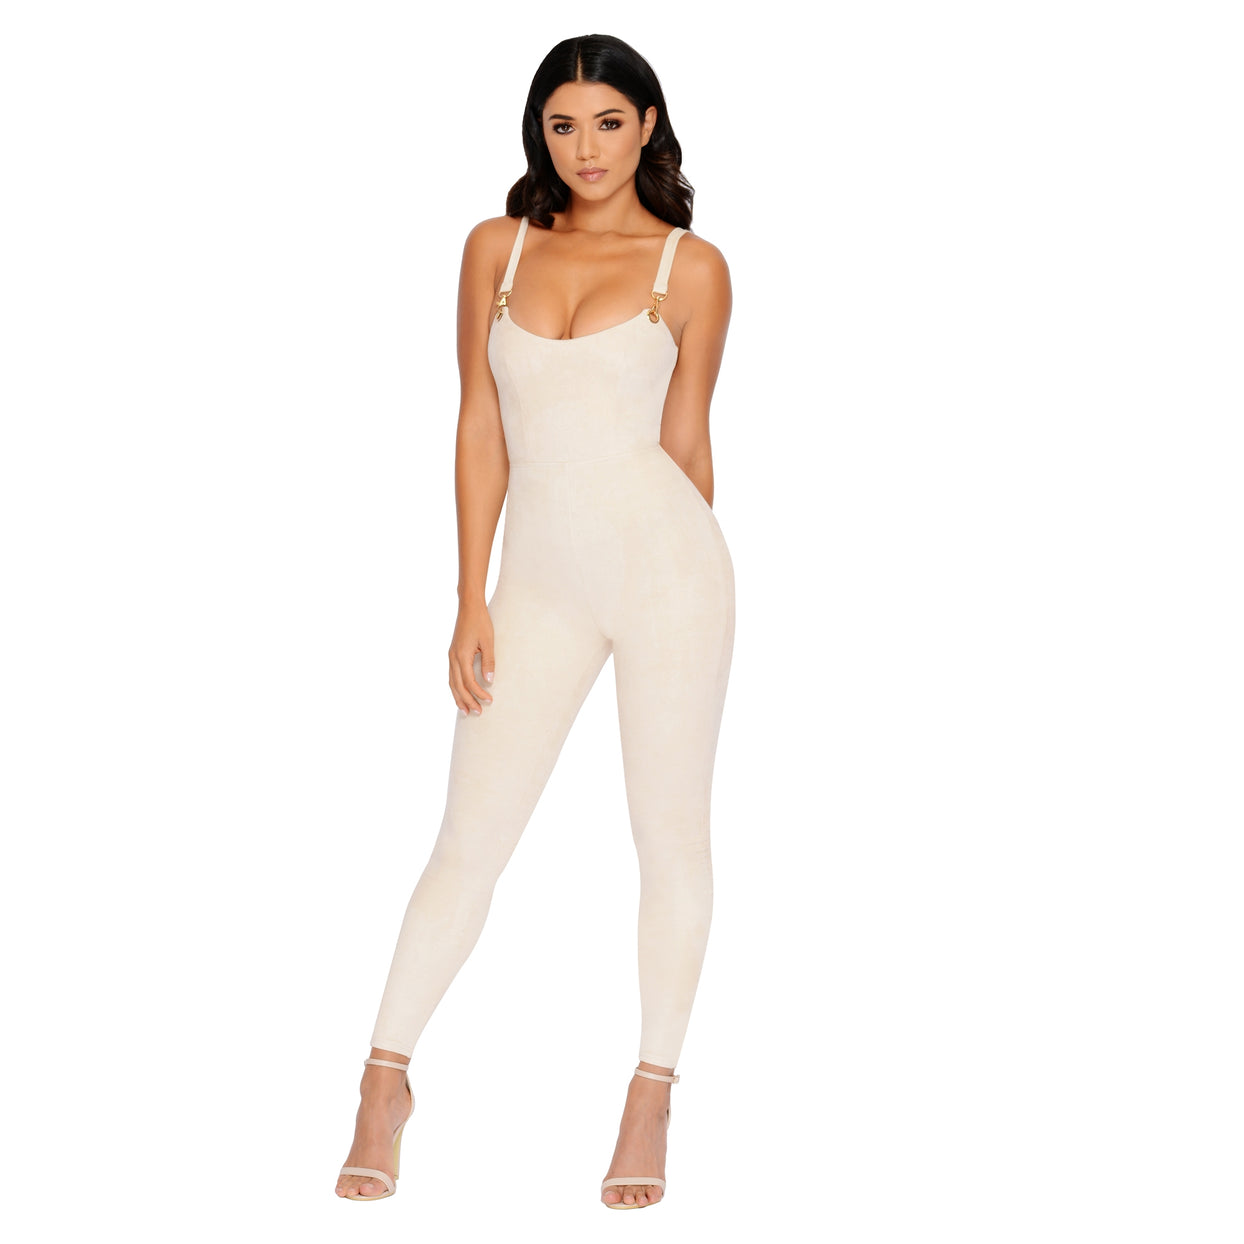 All In One Suede Plunge Ankle Length Jumpsuit in Cream